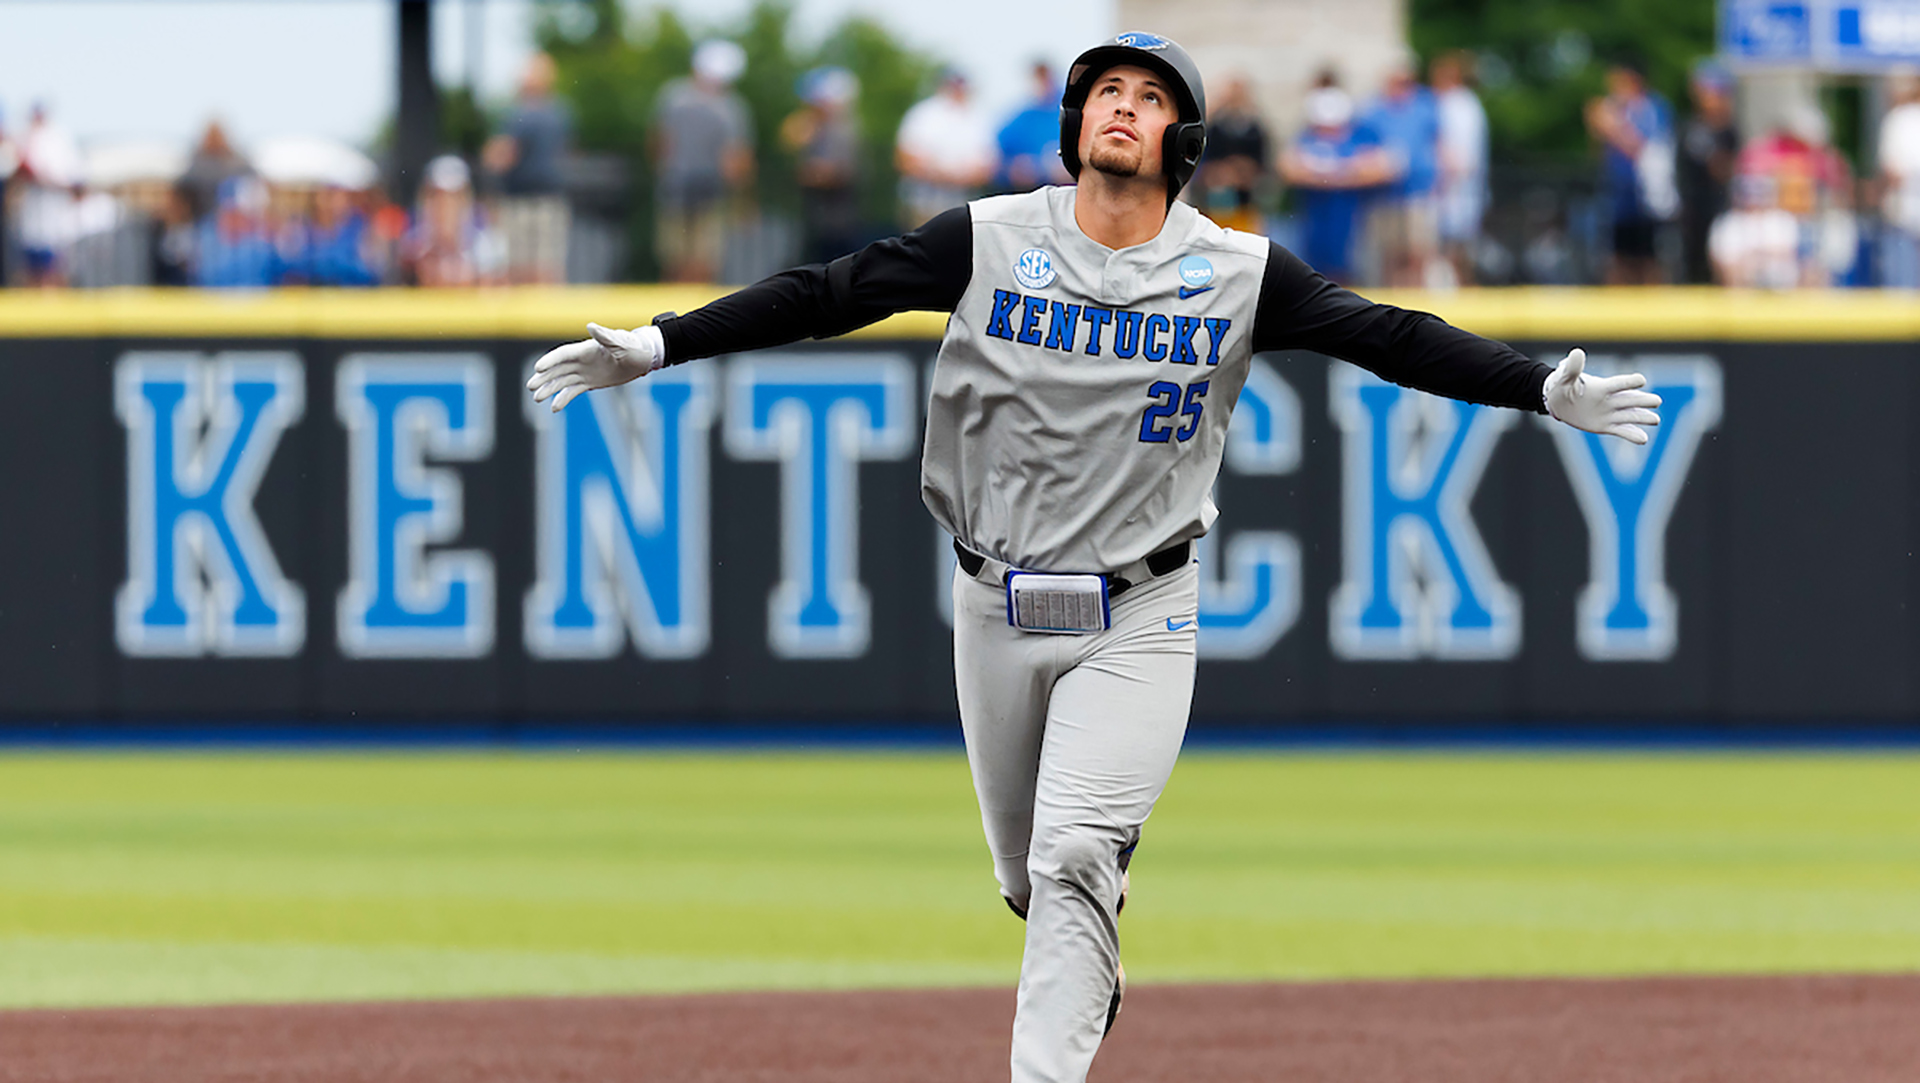 Cats Focused on Themselves as Super Regional Begins